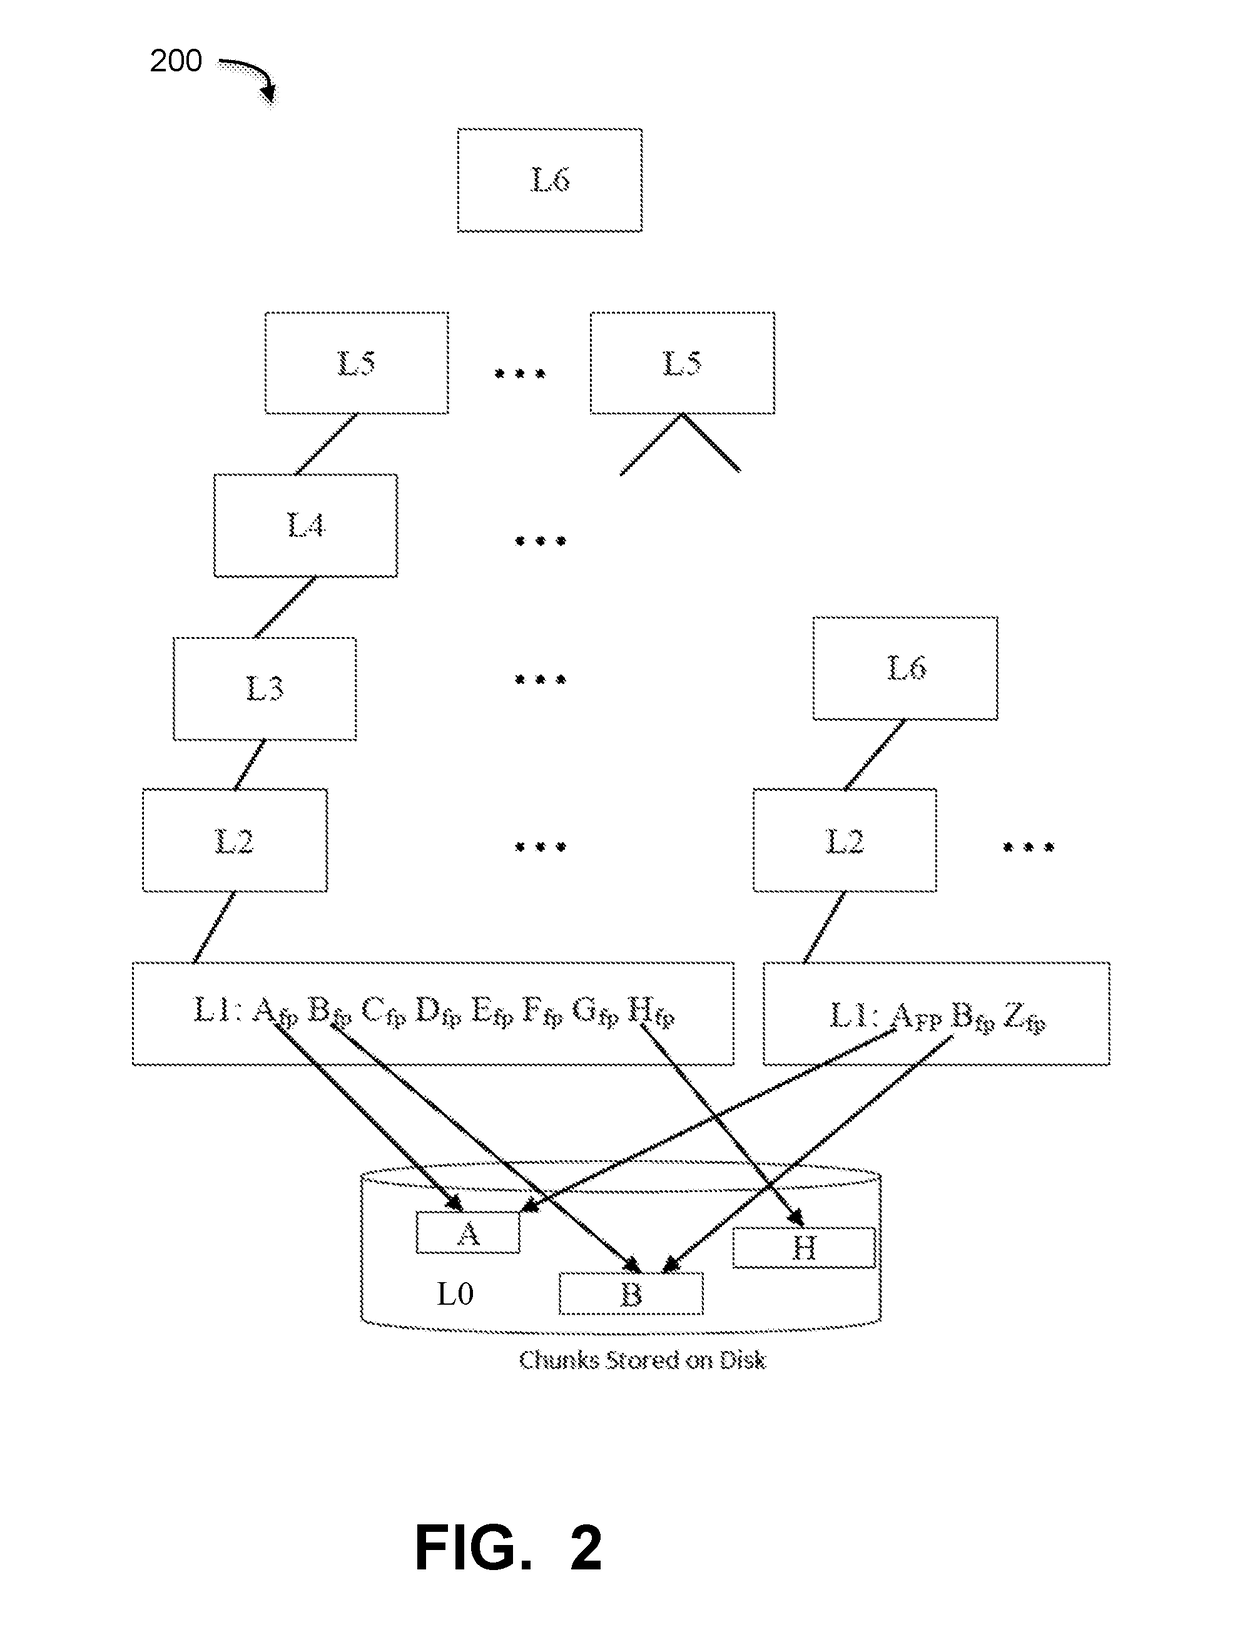 Efficient physical garbage collection using a perfect hash vector